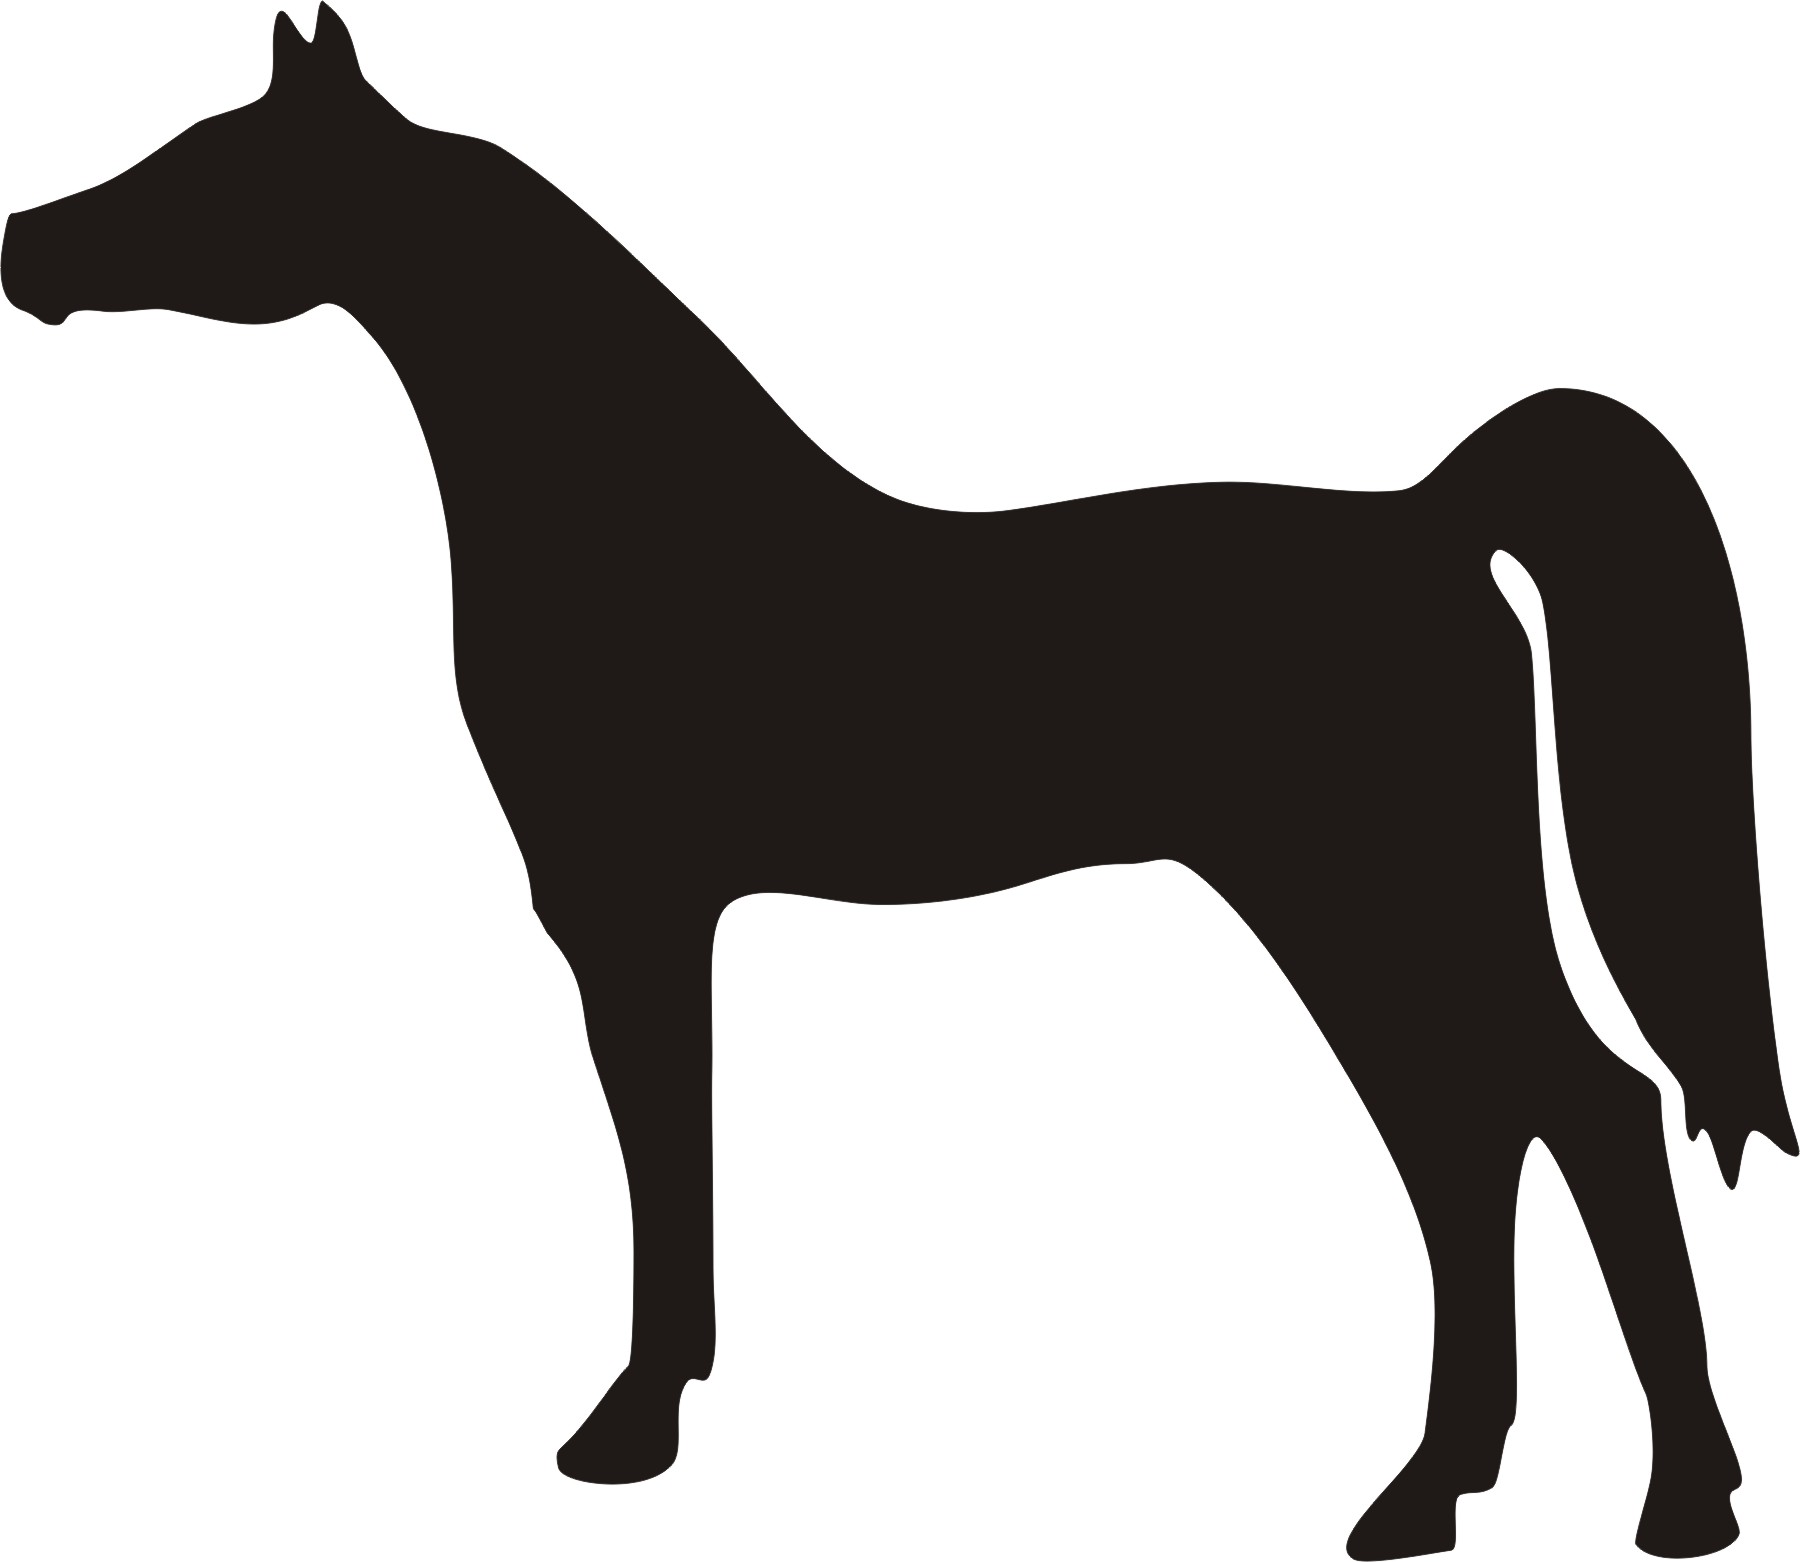 20 Horse Silhouette Free Cliparts That You Can Download To You